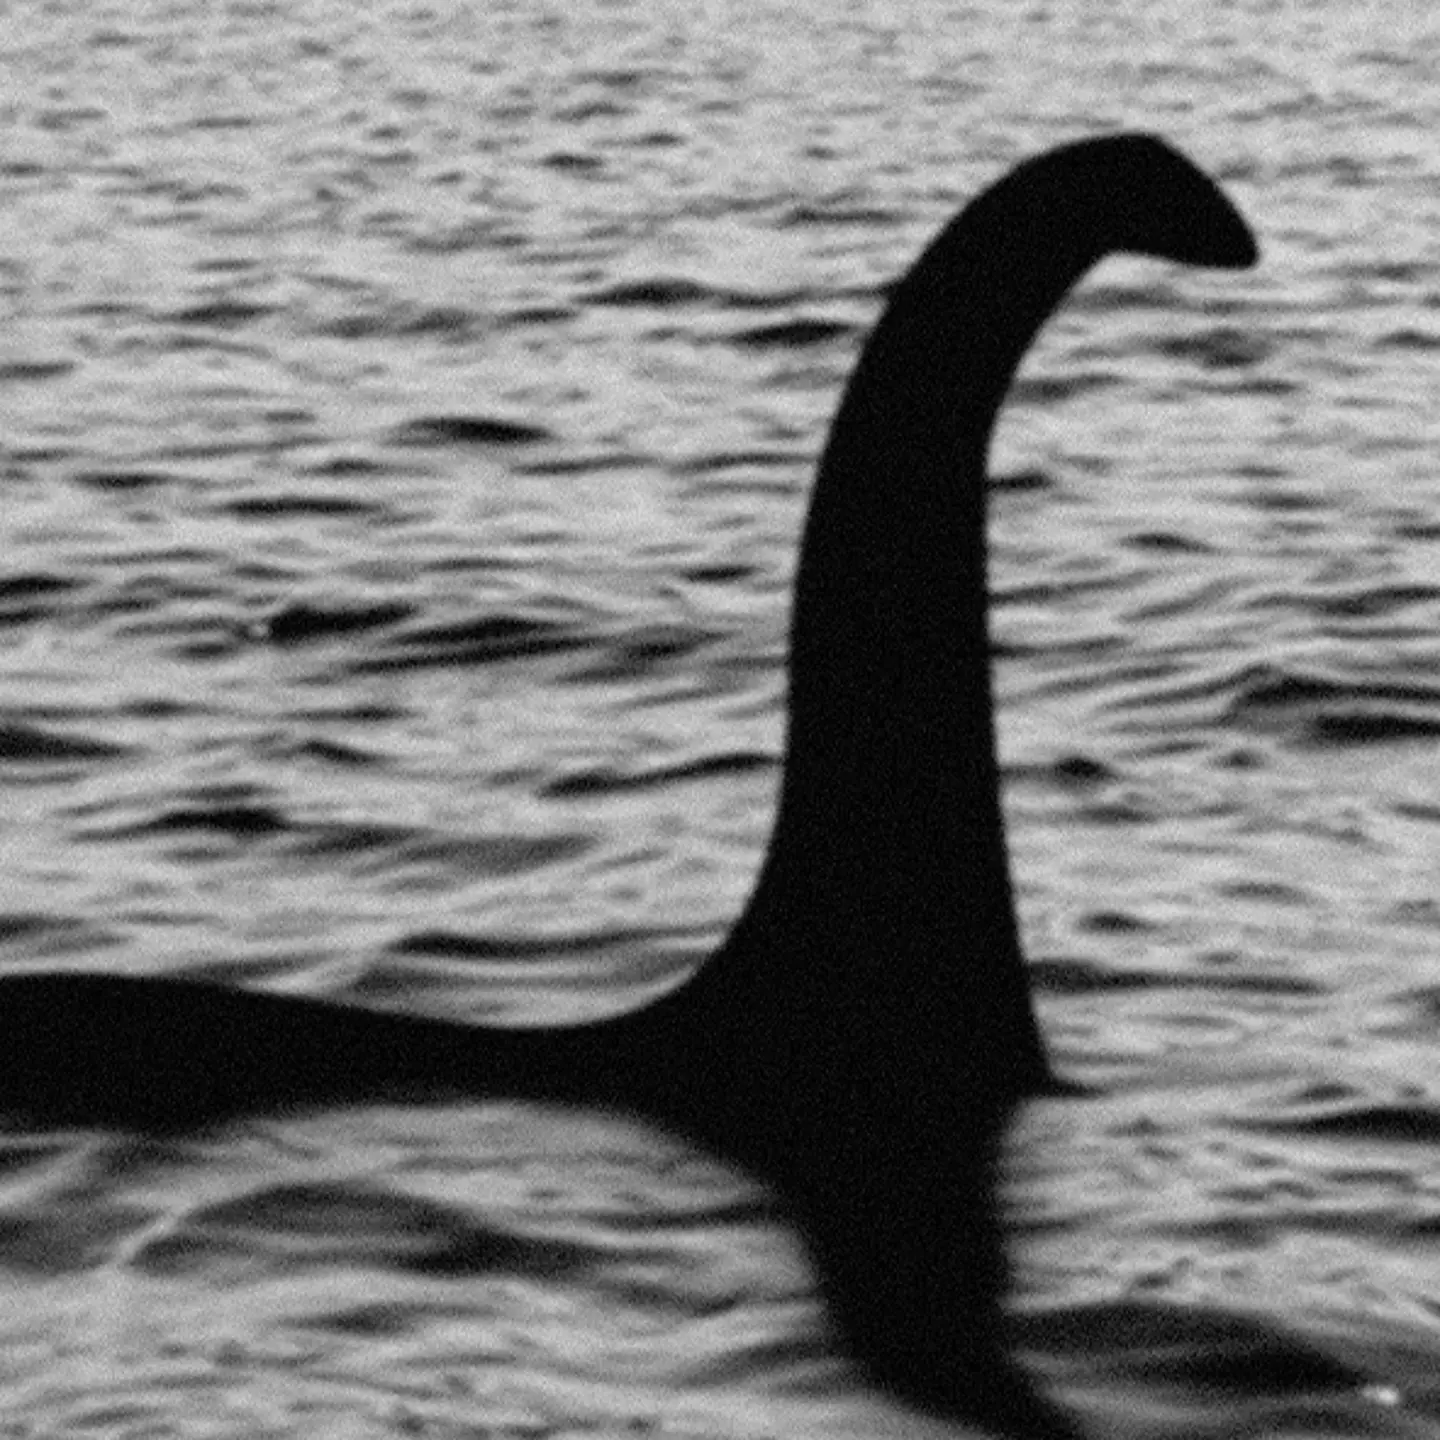 NASA to help in search to find the Loch Ness monster